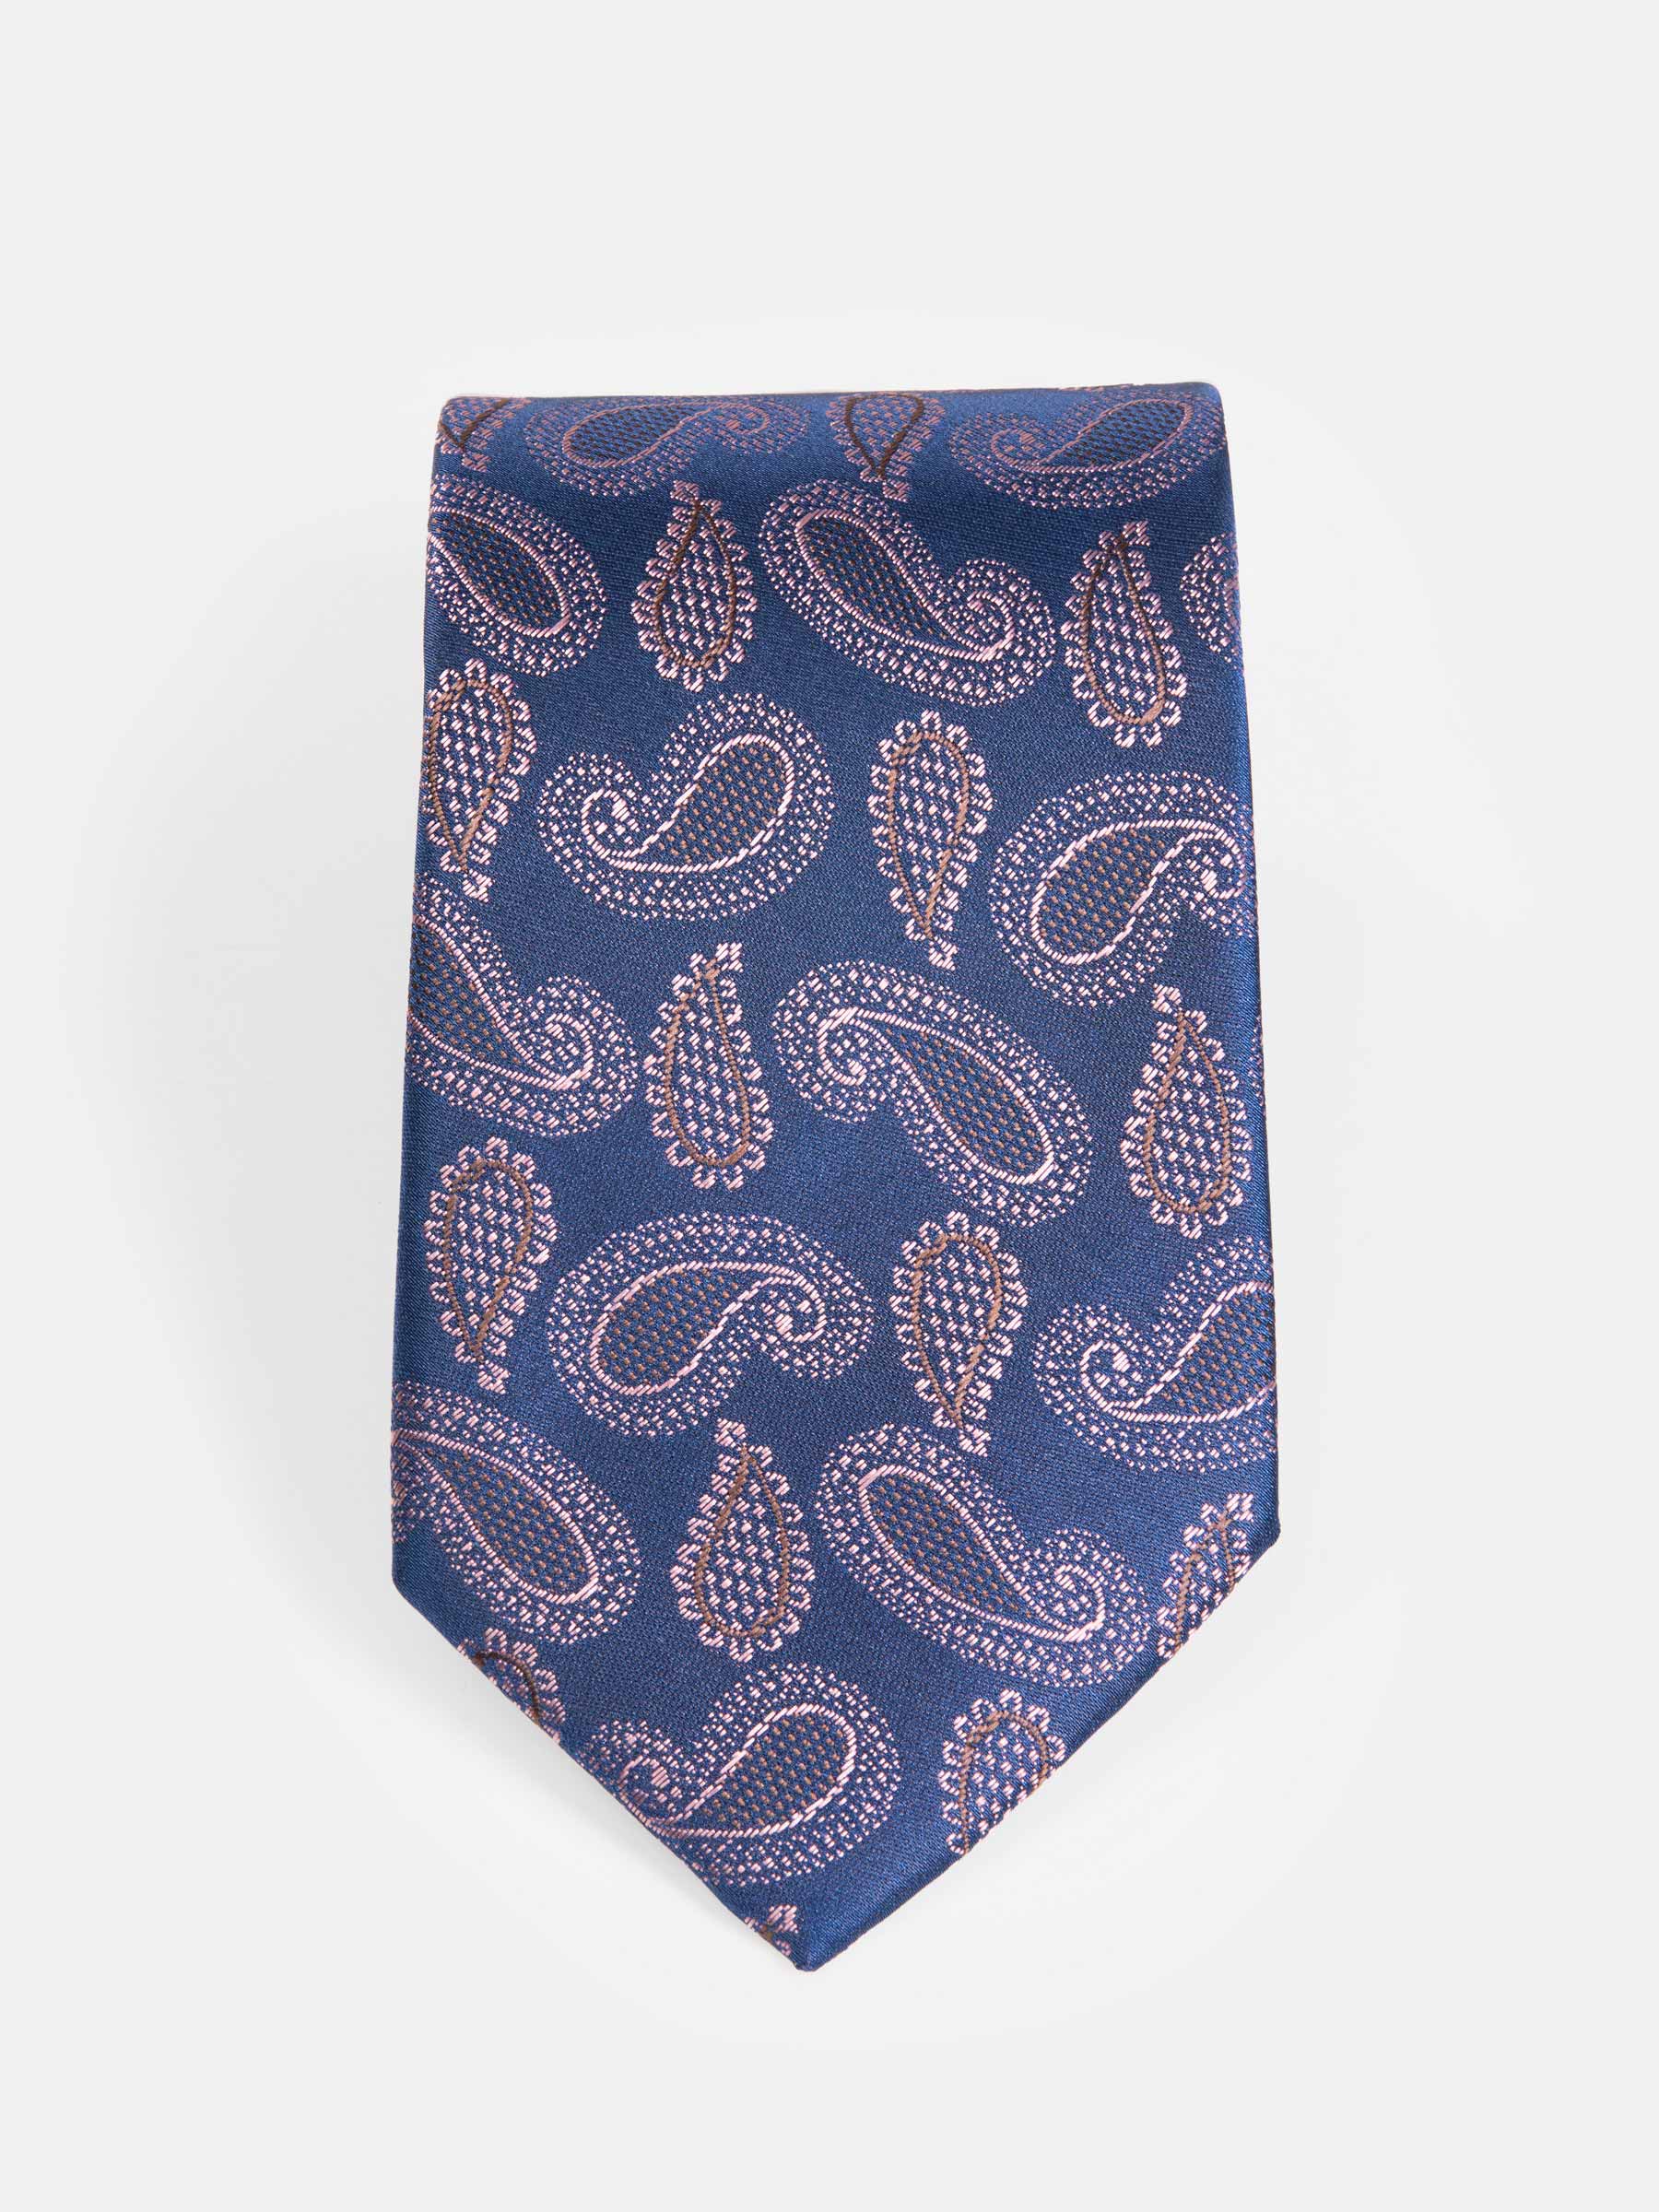 Stropdas 10002 Paisley Navy Pink-One Size